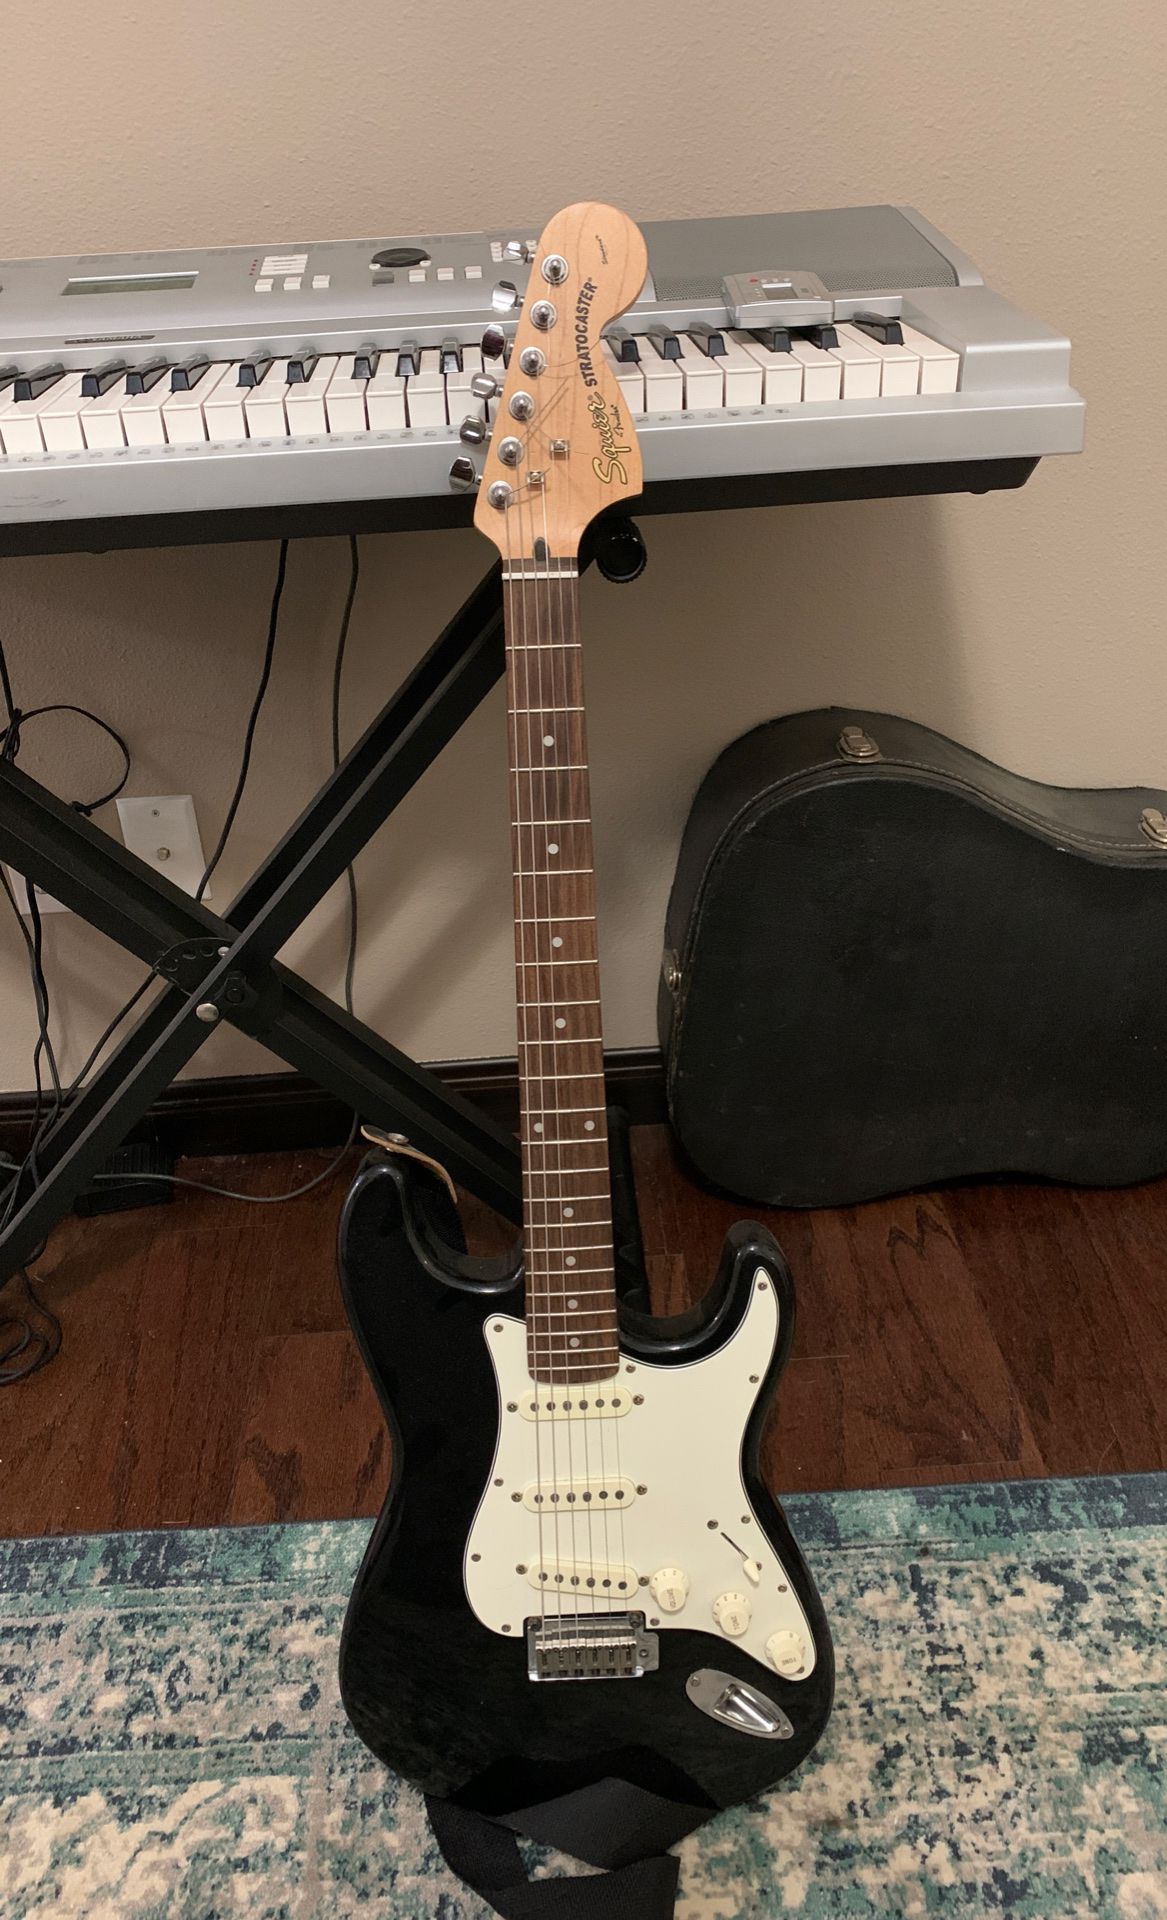 Squire Stratocaster electric guitar